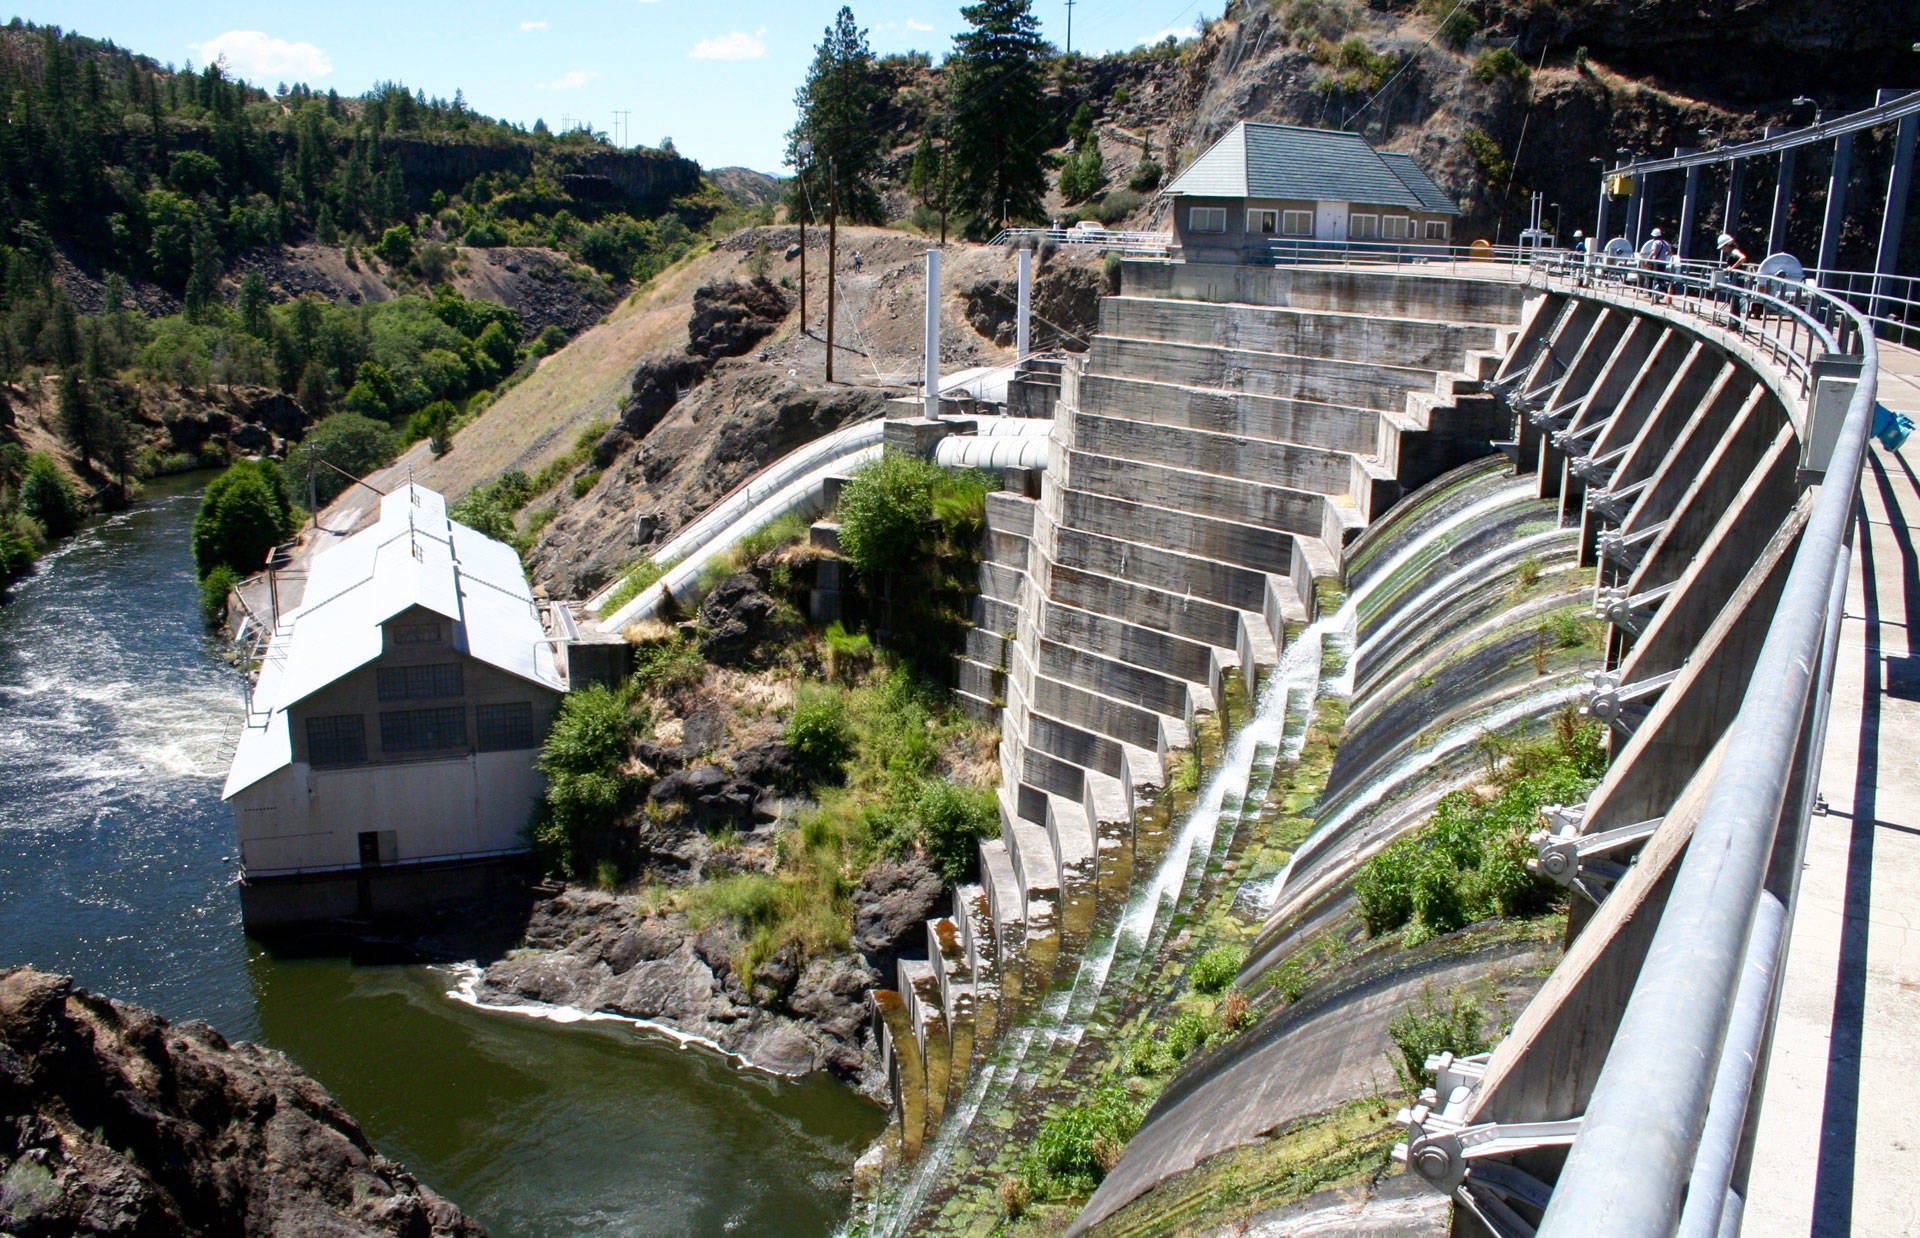 The 132-foot-high Copco 1 Dam, on the Klamath River outside Hornbrook, California, has generated power for nearly a century. Now, its owner has set in motion a plan to dismantle it, if approved by federal energy regulators. Molly Peterson/KQED